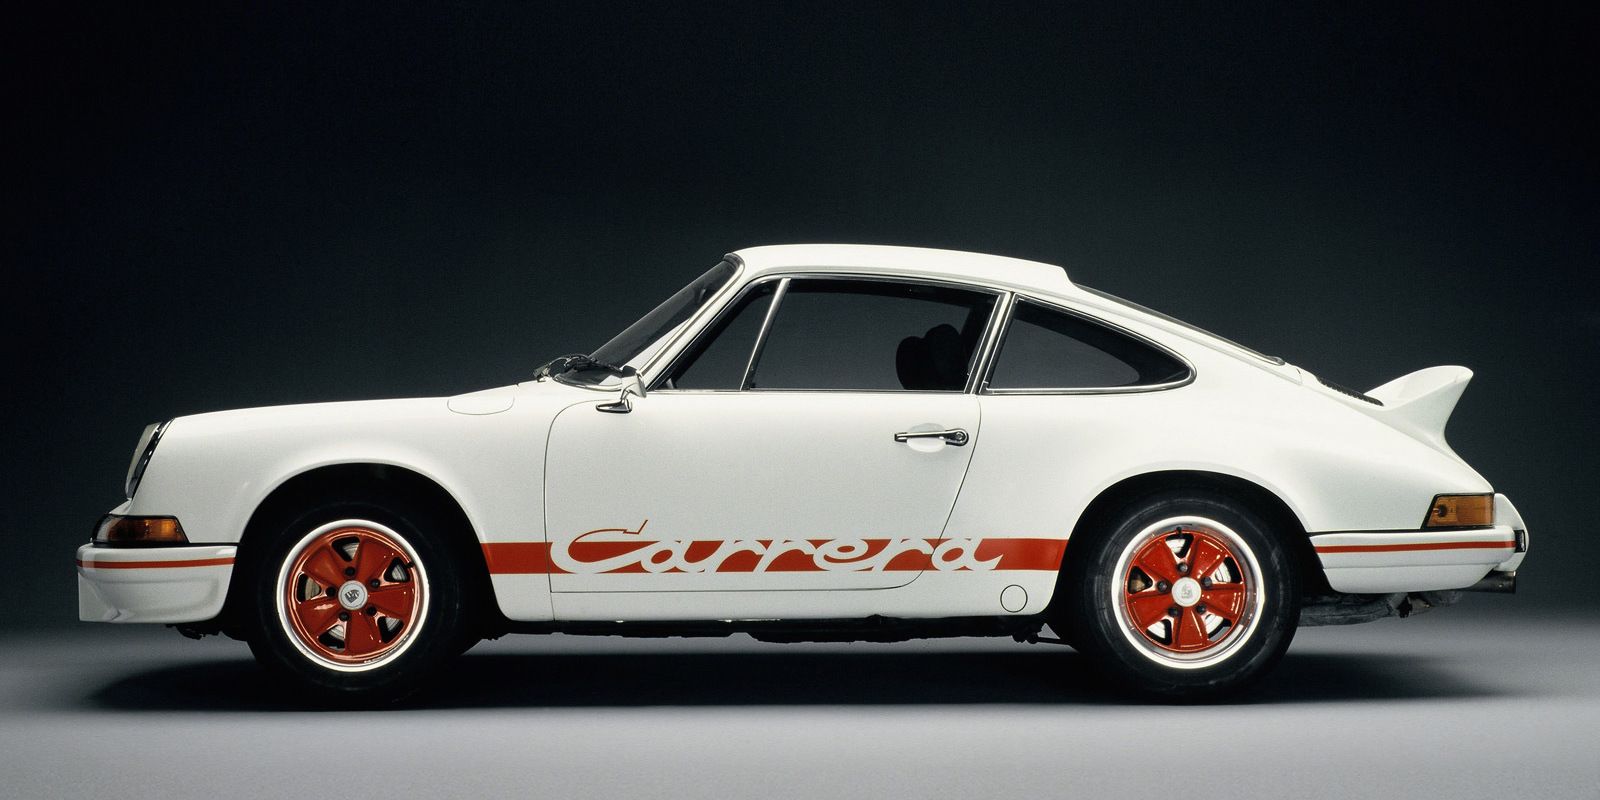 13 of the Greatest Porsche 911s Ever Made